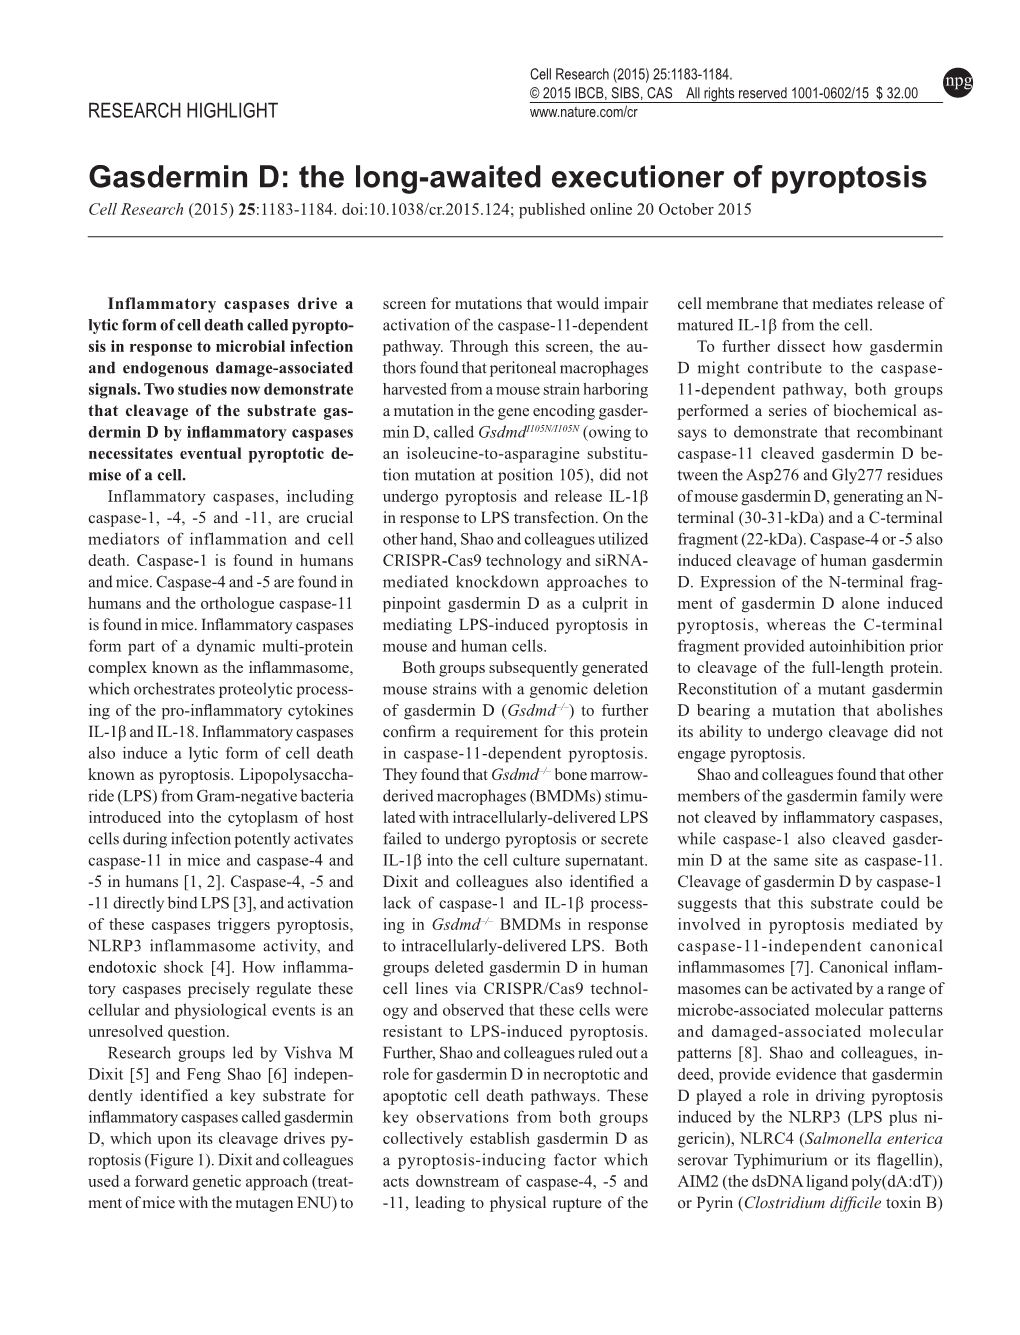 Gasdermin D: the Long-Awaited Executioner of Pyroptosis Cell Research (2015) 25:1183-1184